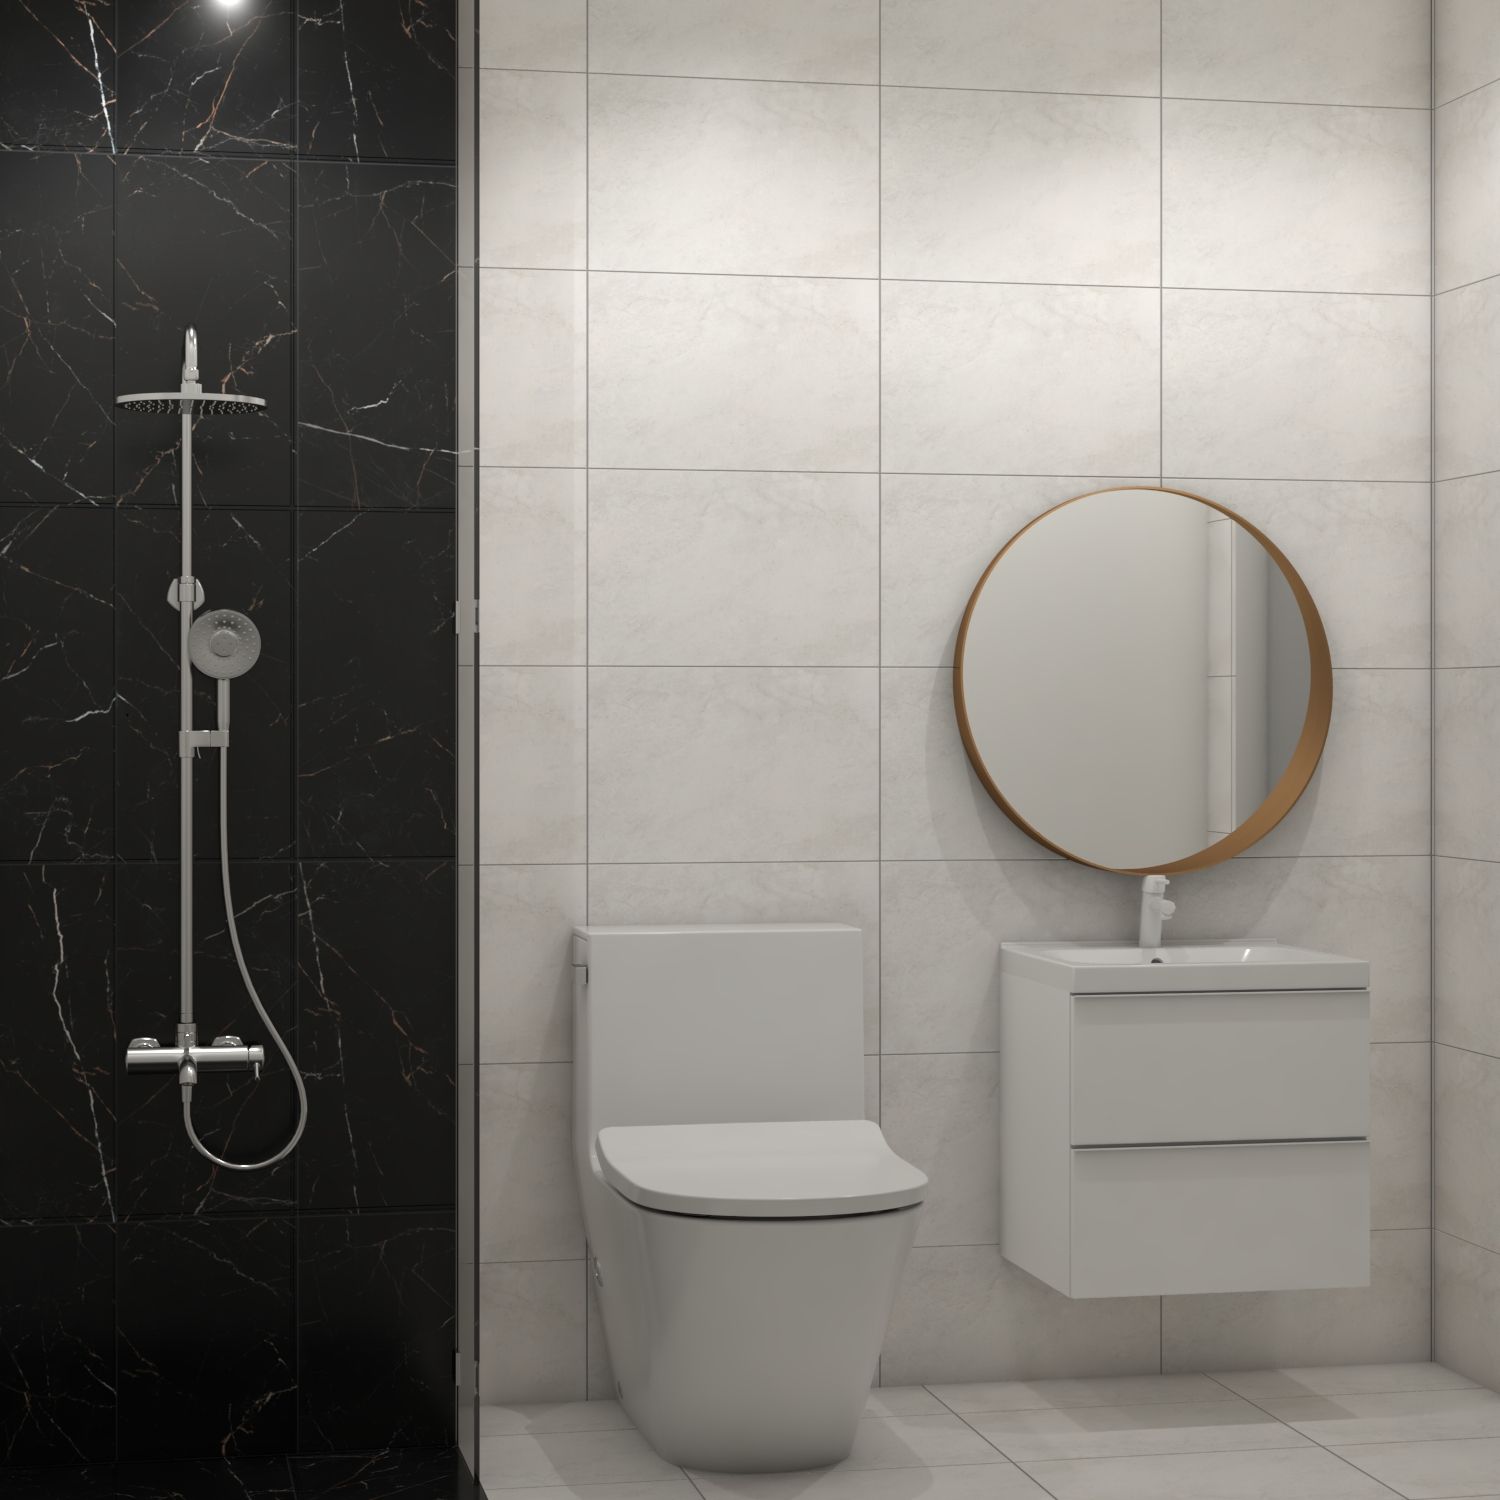 Contemporary White Rectangular Bathroom Tiles With Matte Finish